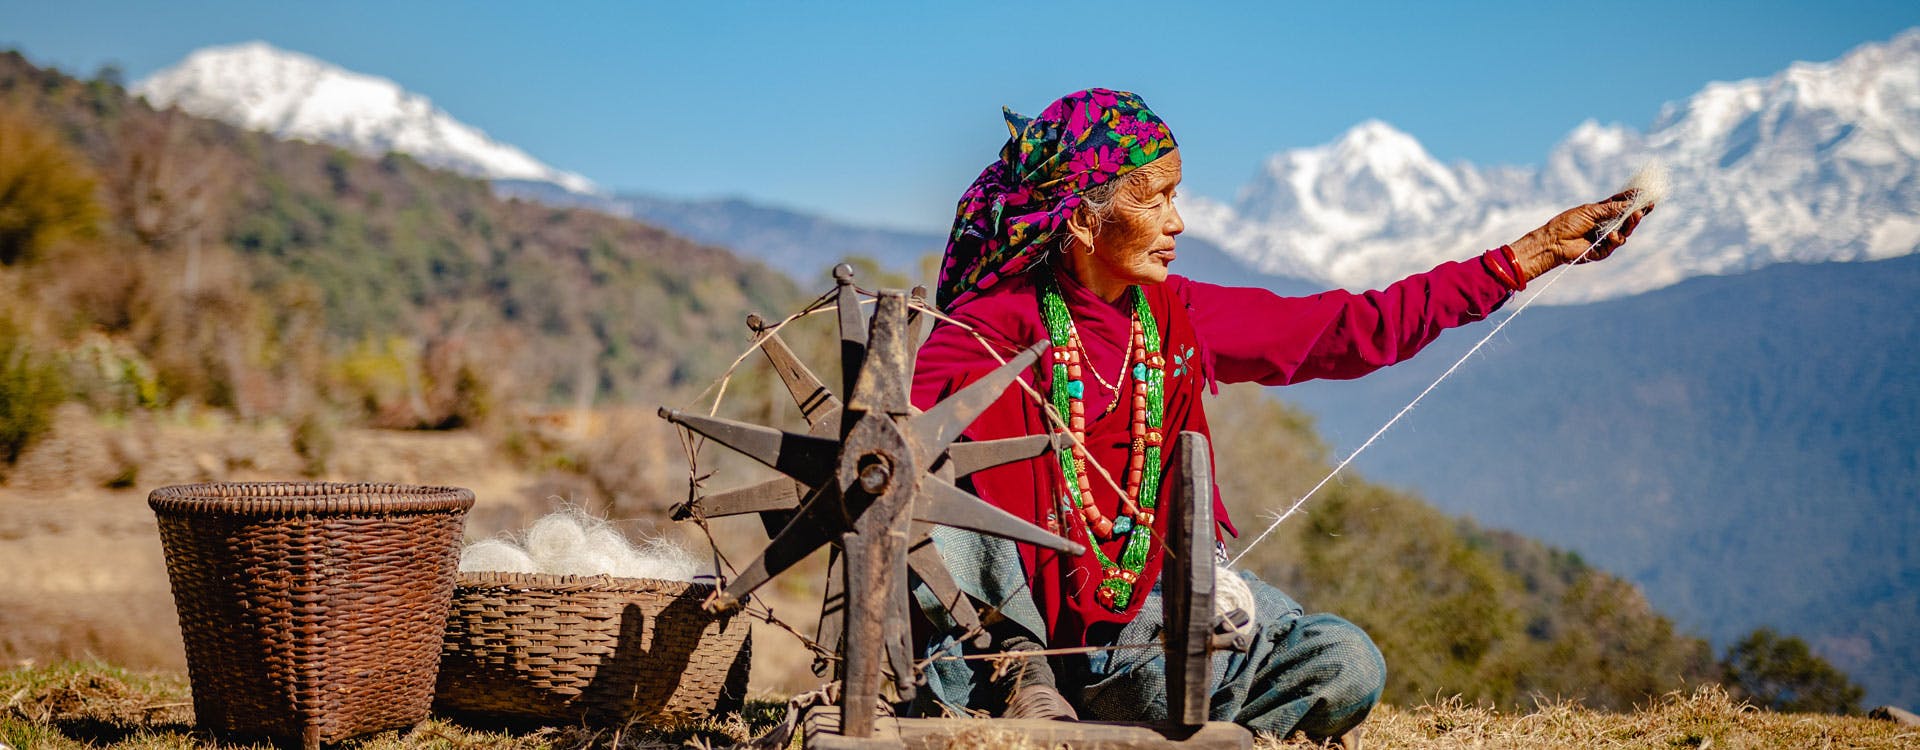 Women making woolen clothes in front of the Himalaya range in Nepal